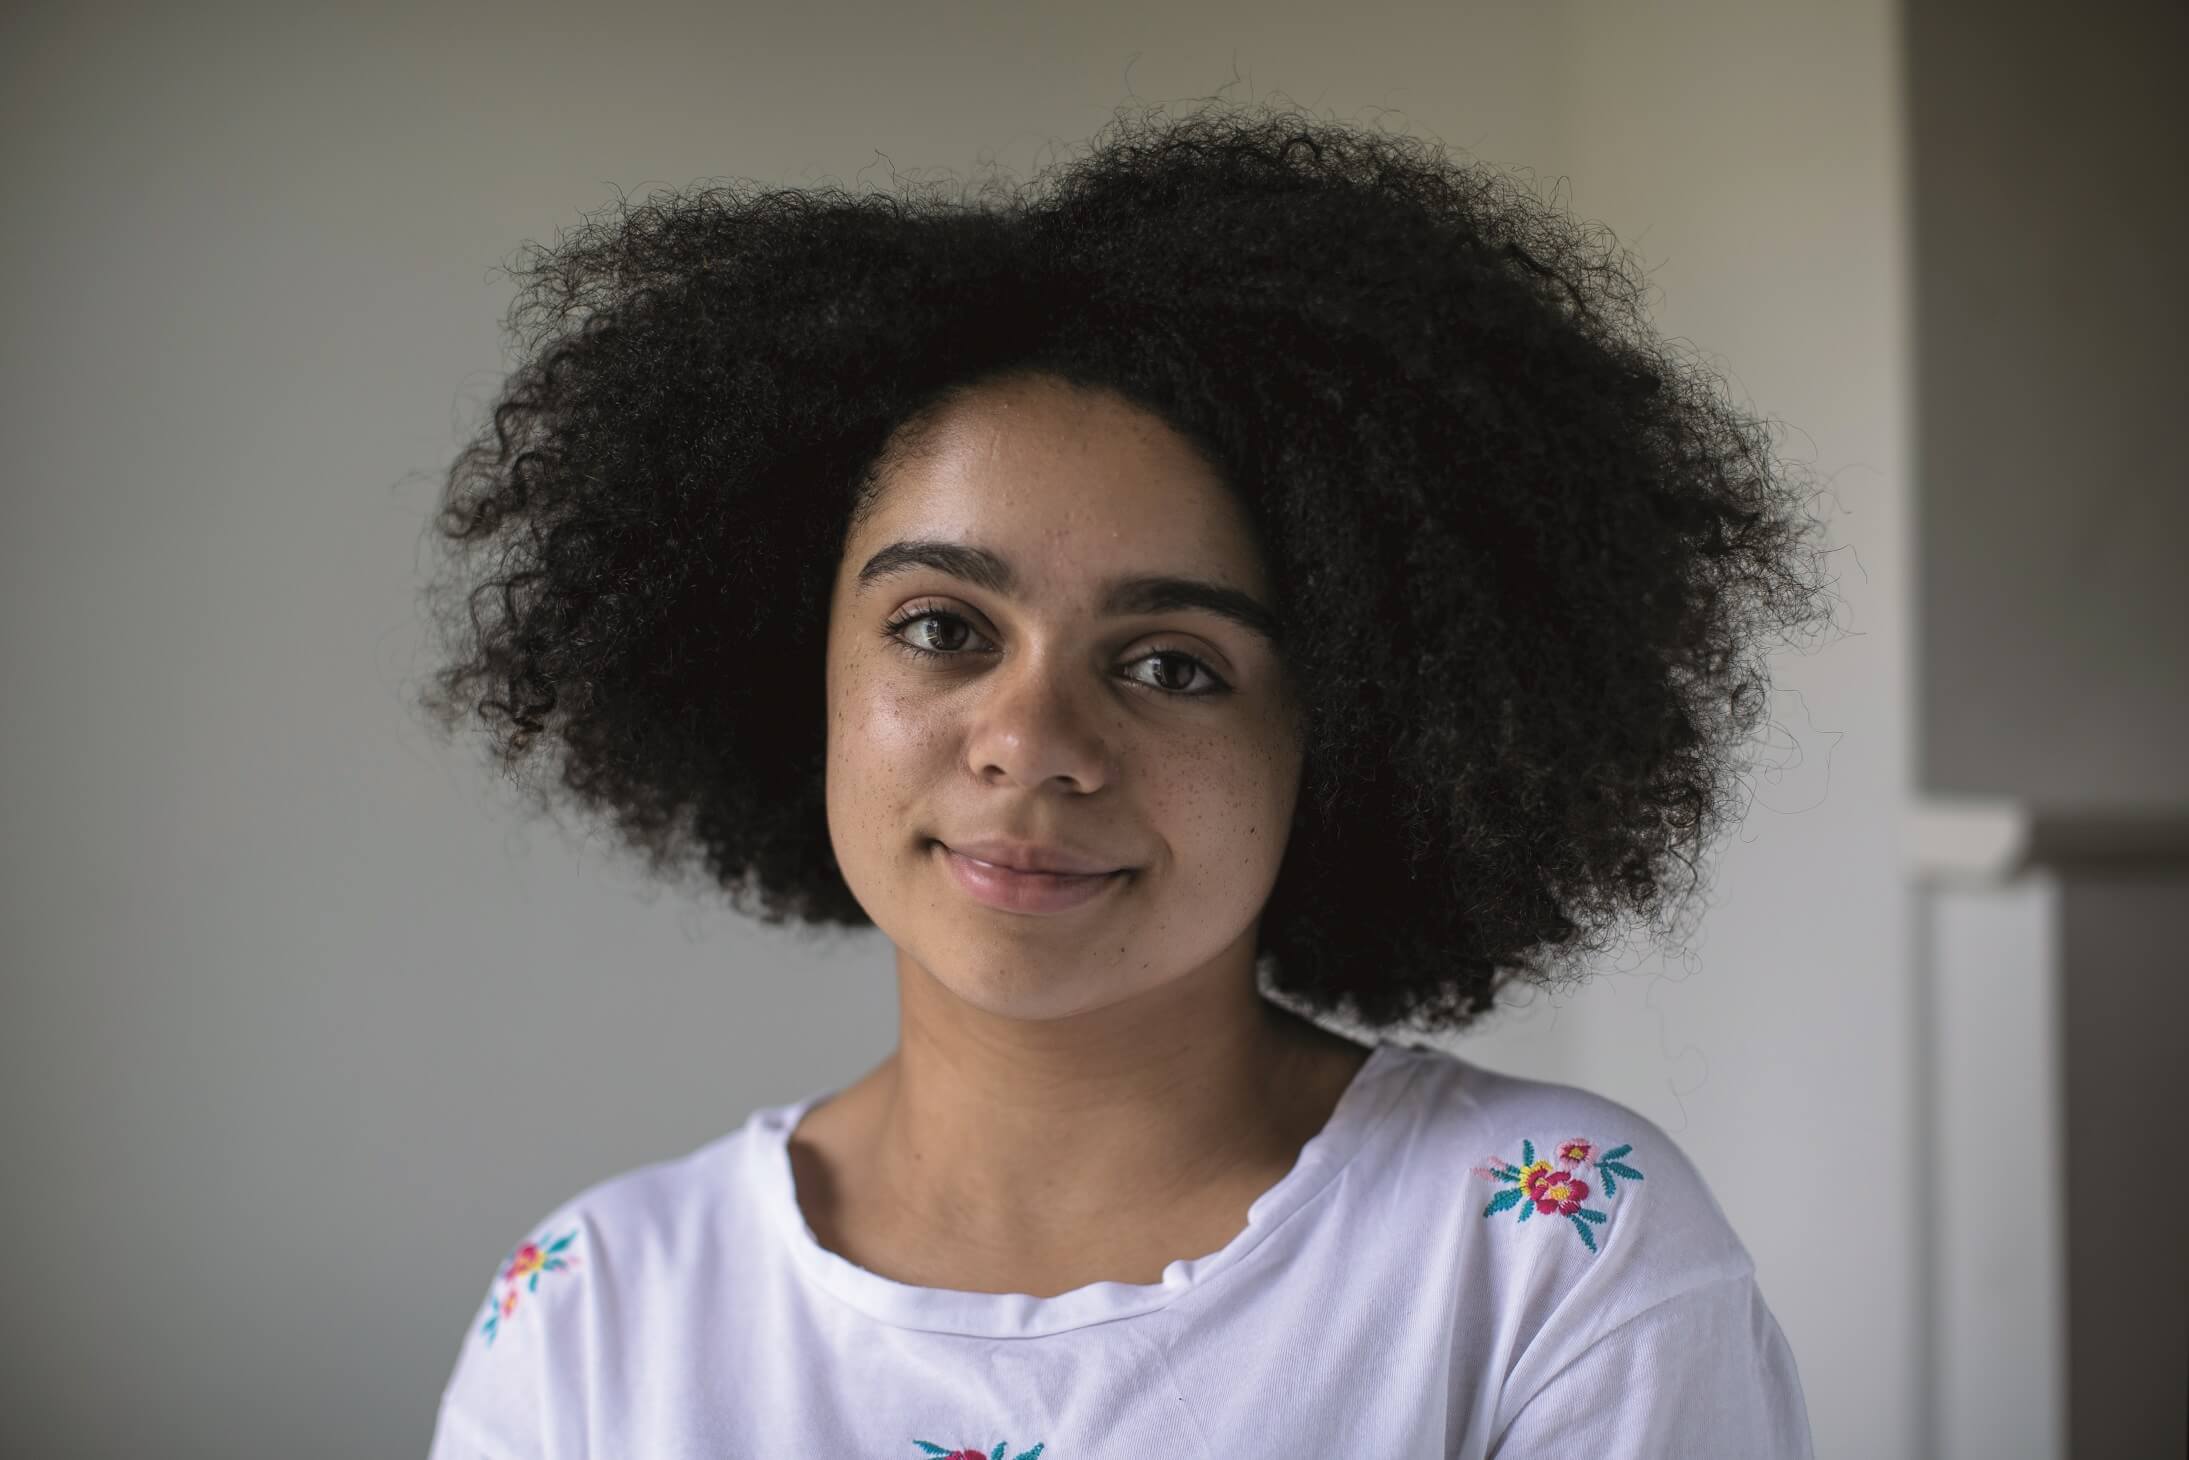 Erica, 15, has been supported by Barnardo's for domestic abuse